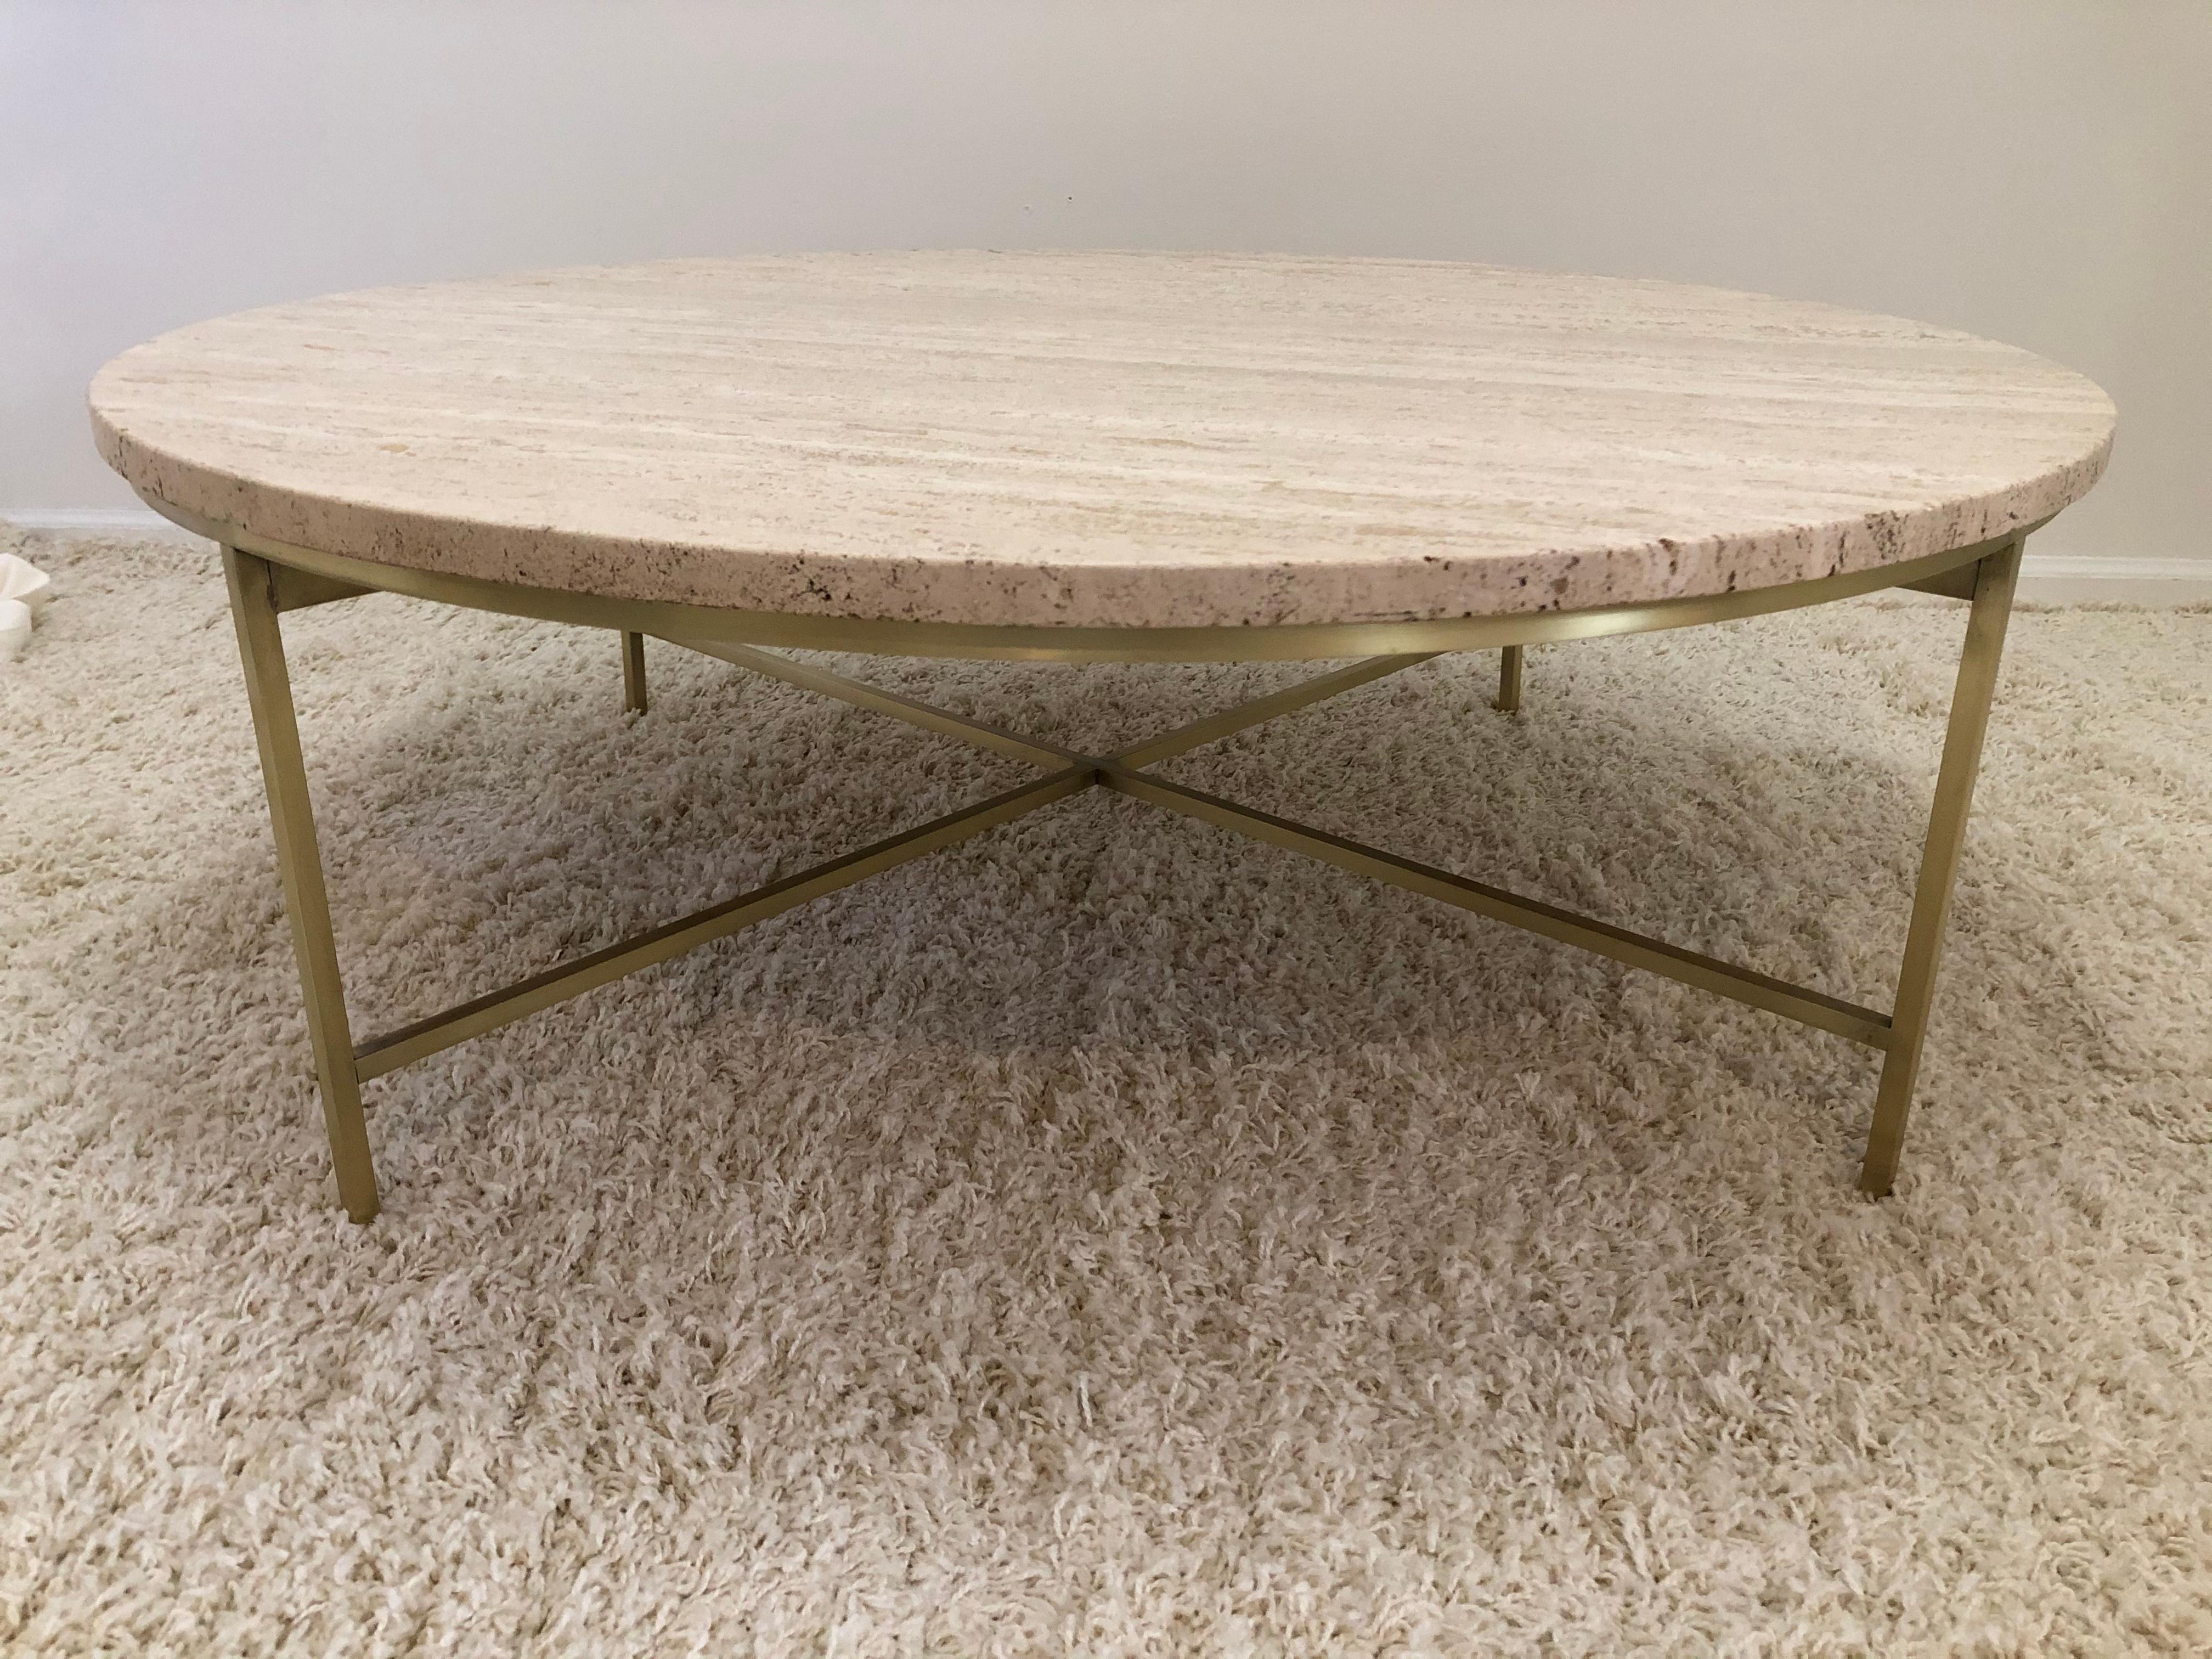 20th Century Paul McCobb Terrazzo Marble Top Brass Cocktail/ Coffee Table